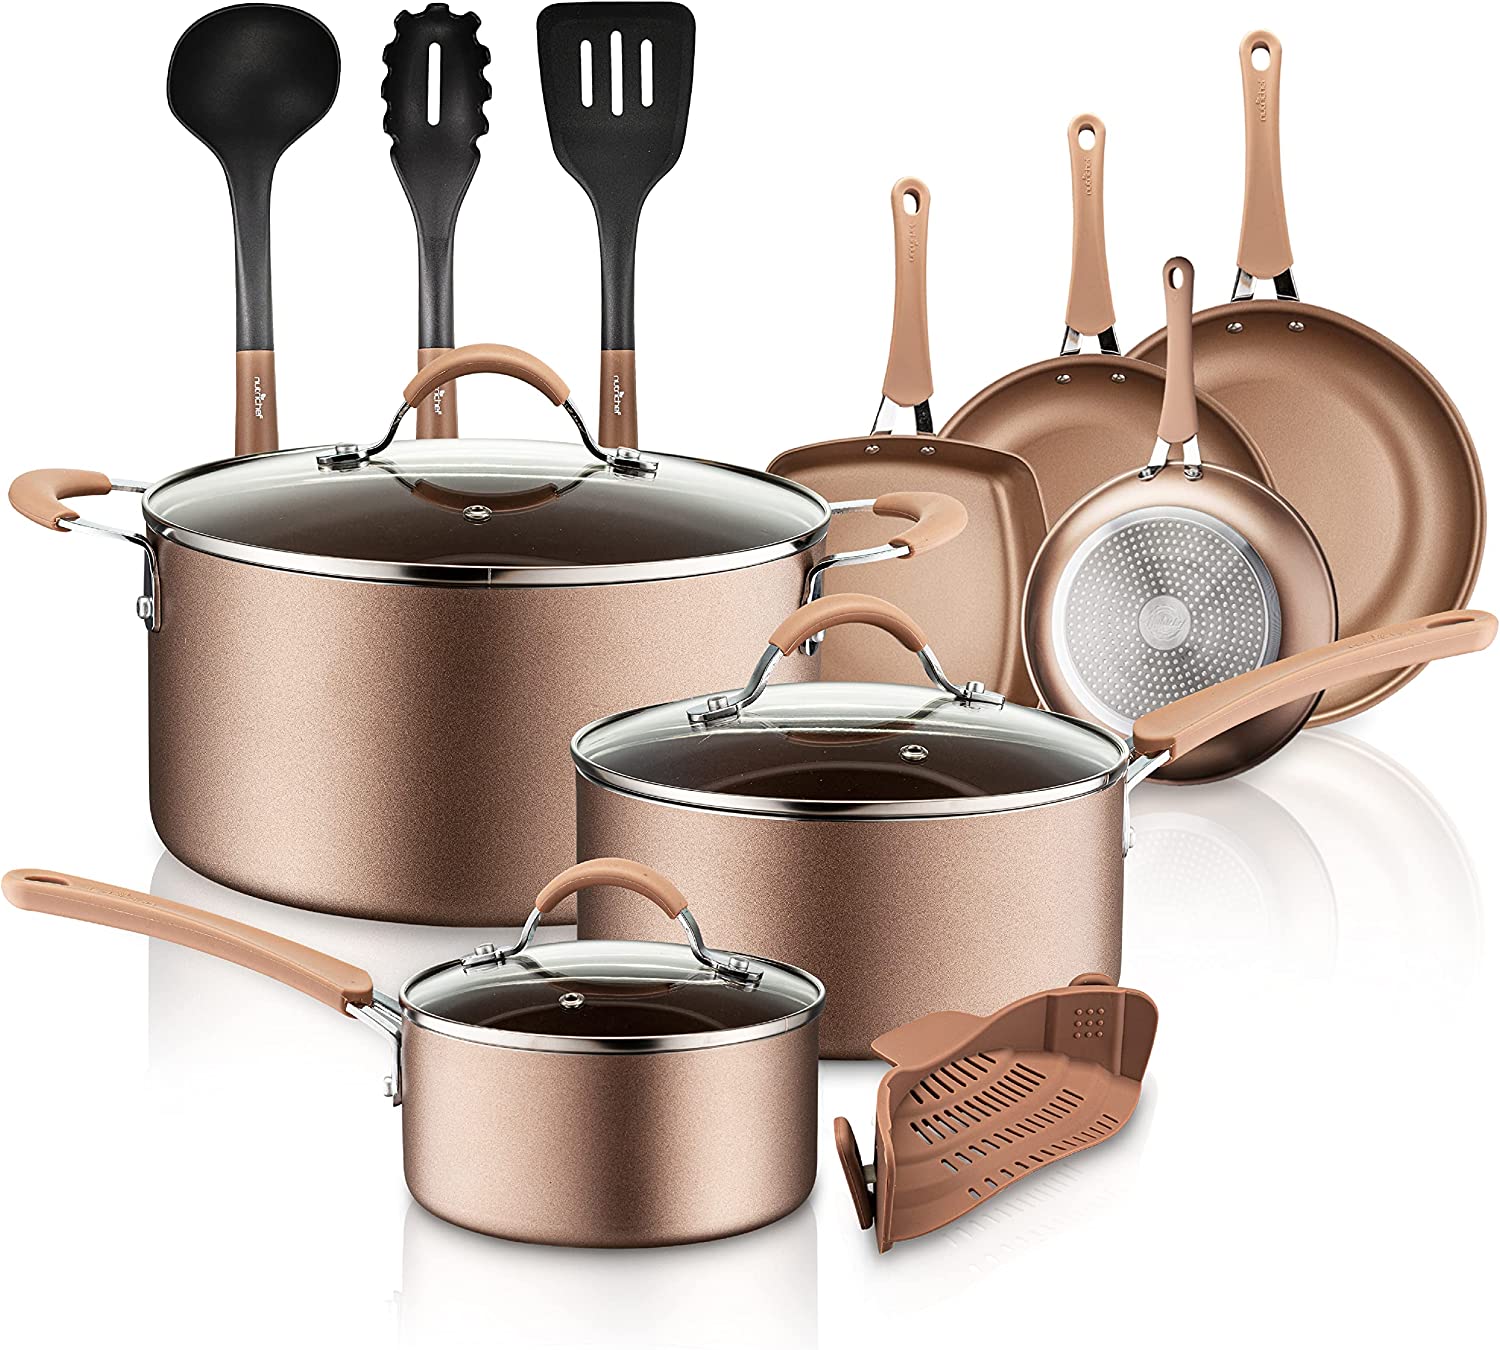 NutriChef Cookware (14 PC)